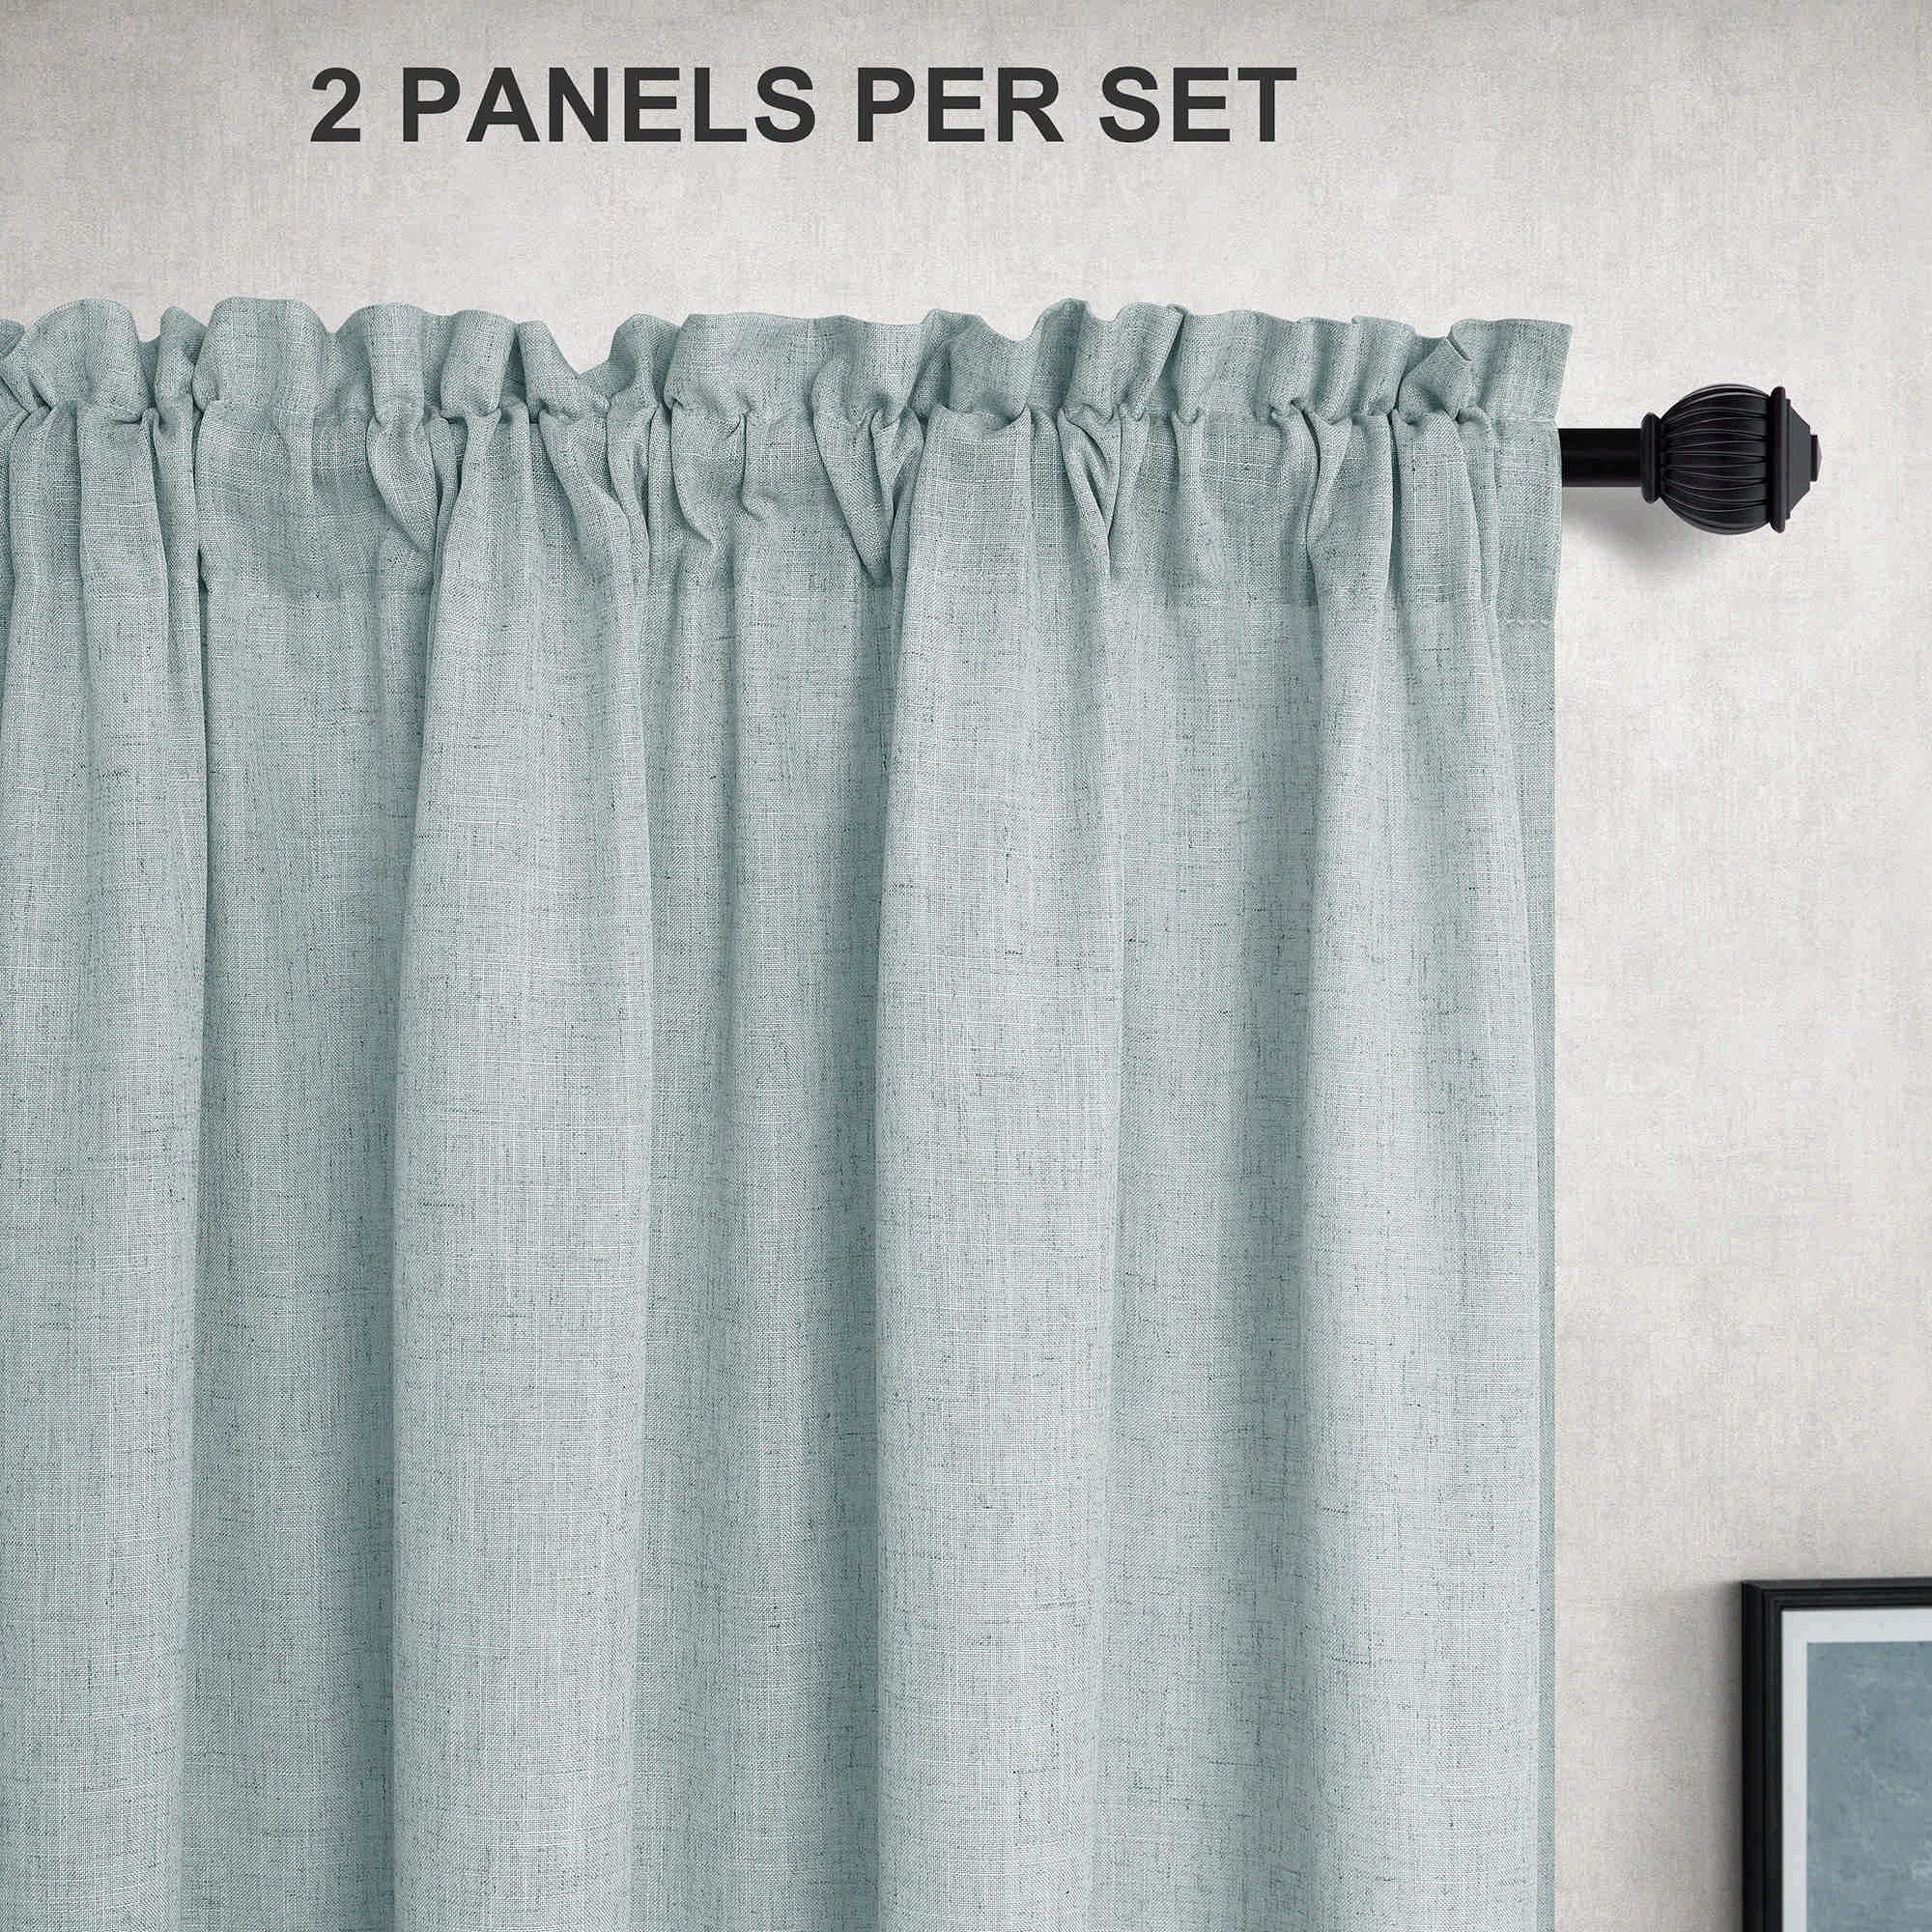 Mrs.Naturall Aqua Curtains 38 Inch Width for Kitchen 2 Panel Rod Pocket Semi Sheer Linen Short Cafe Blue Green Tier Curtains for Basement Lau